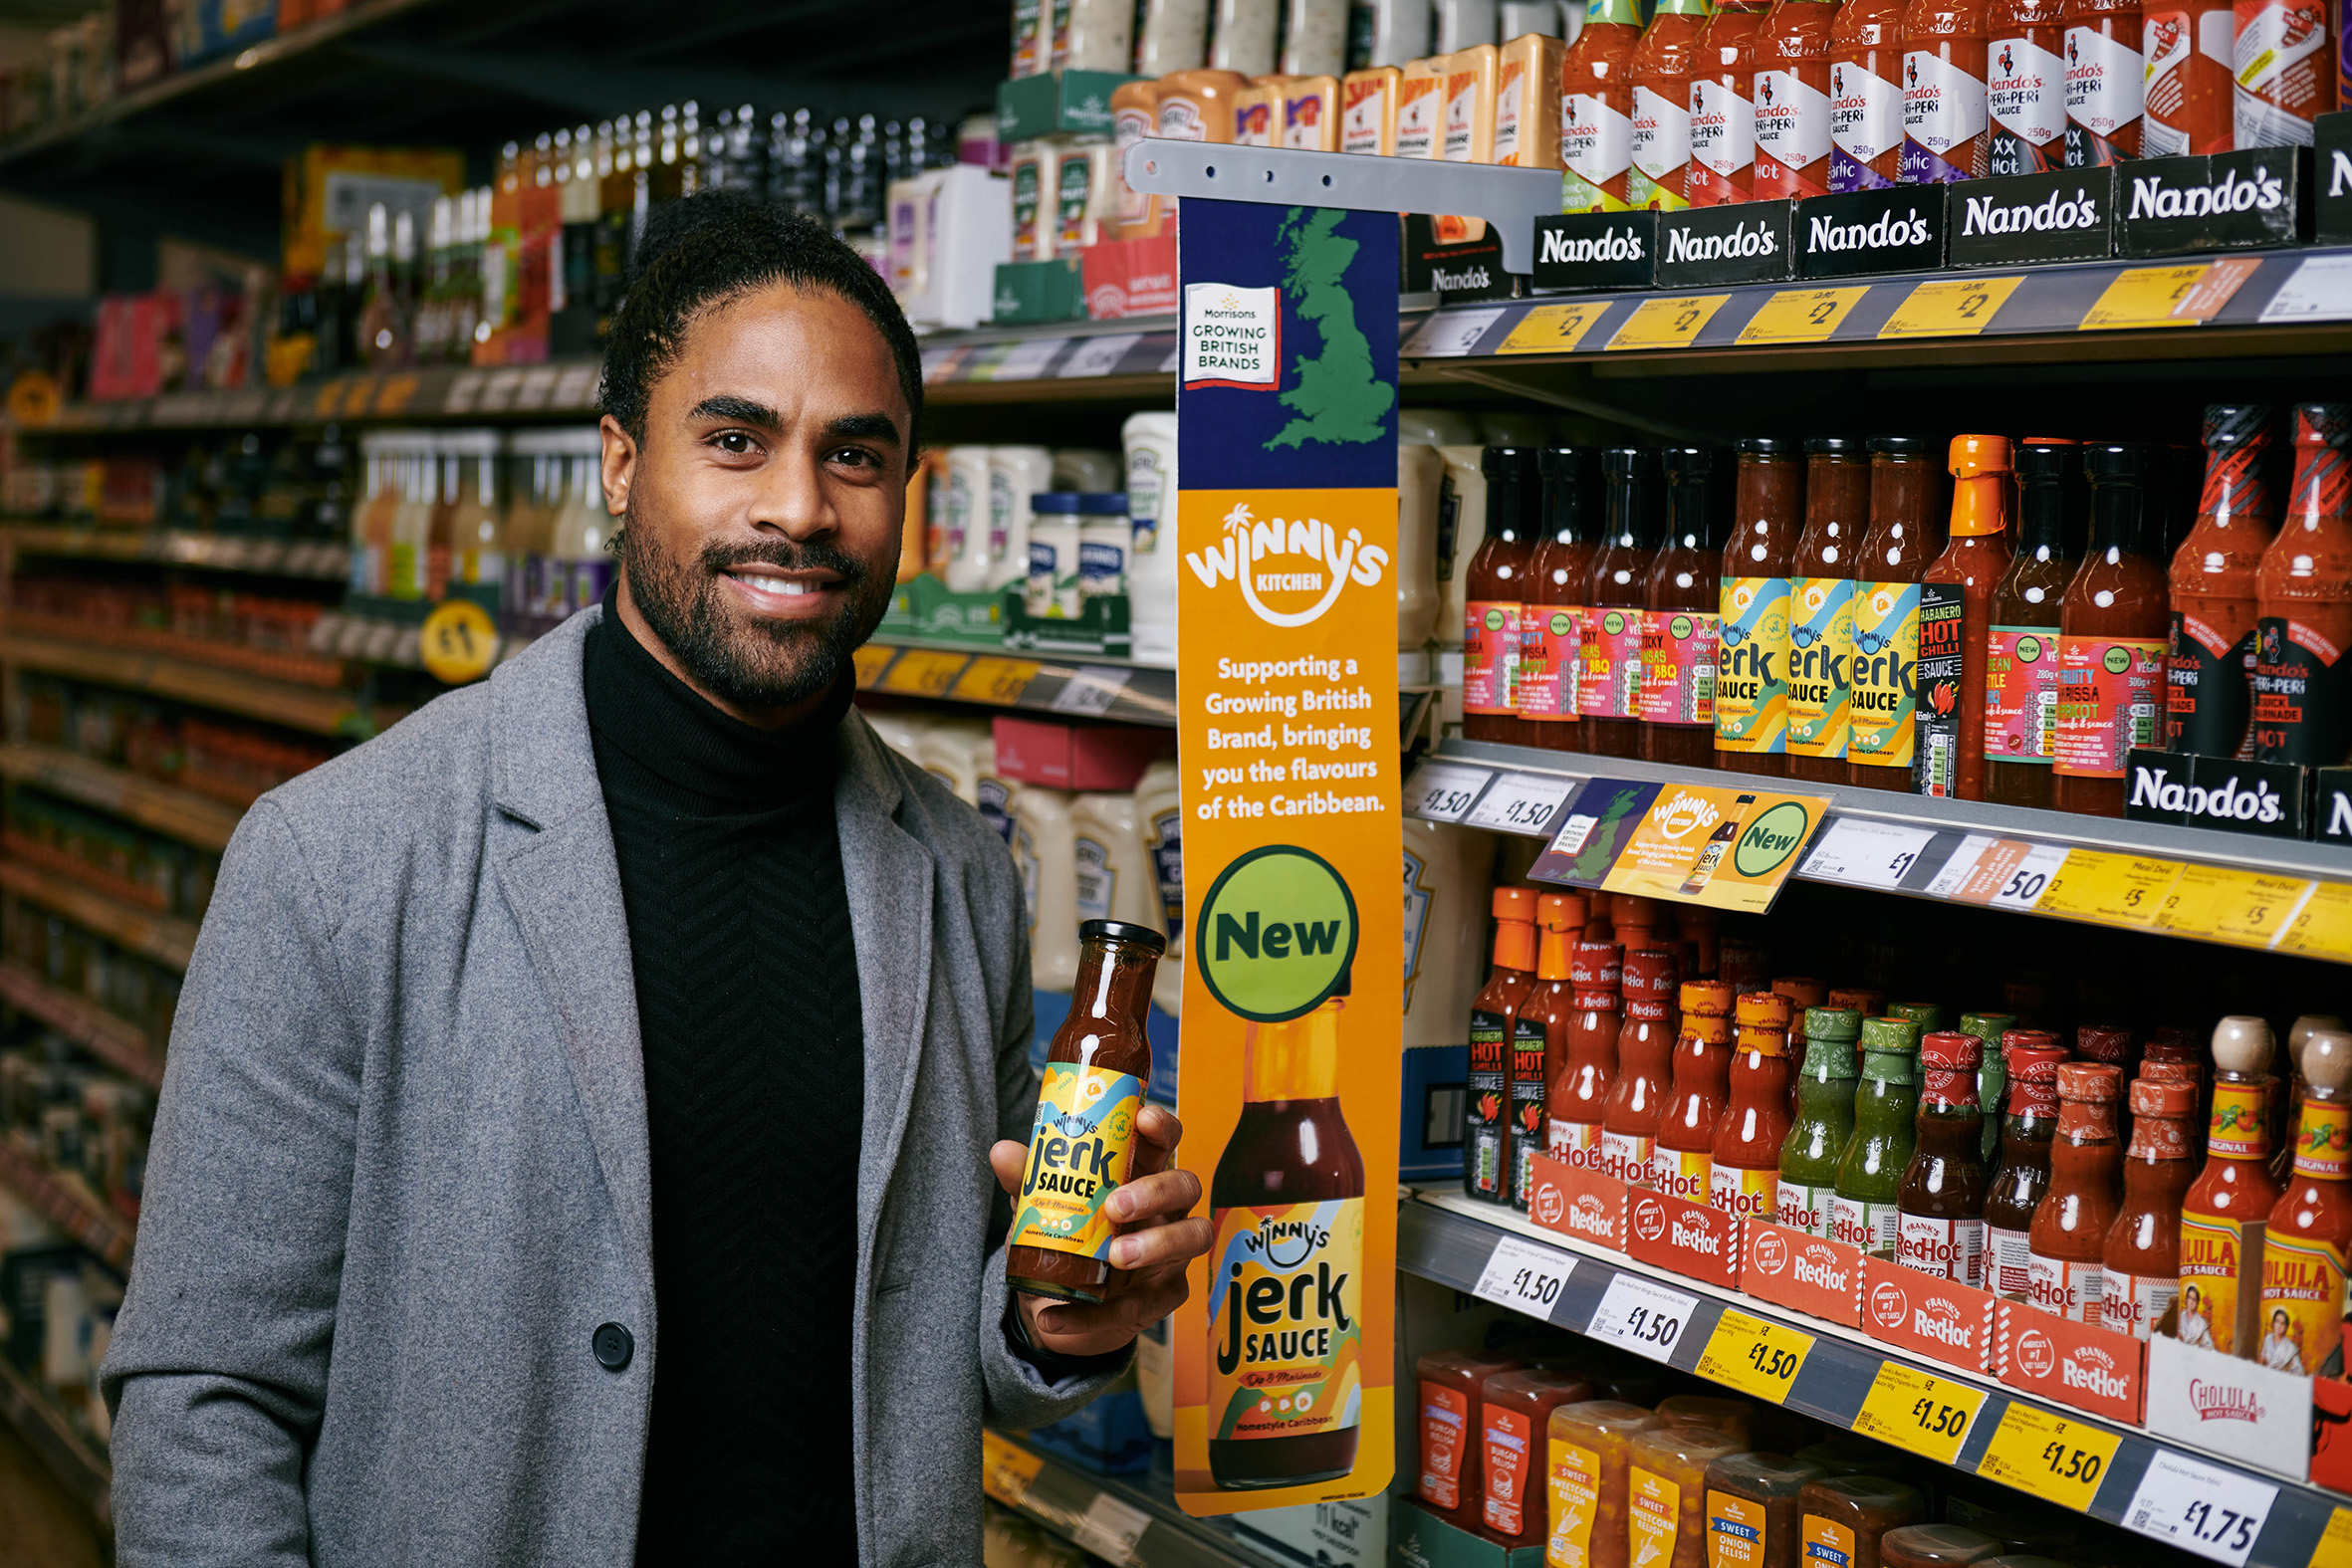 Morrisons grows another British brand by by putting start-up Winny's Kitchen on the shelf